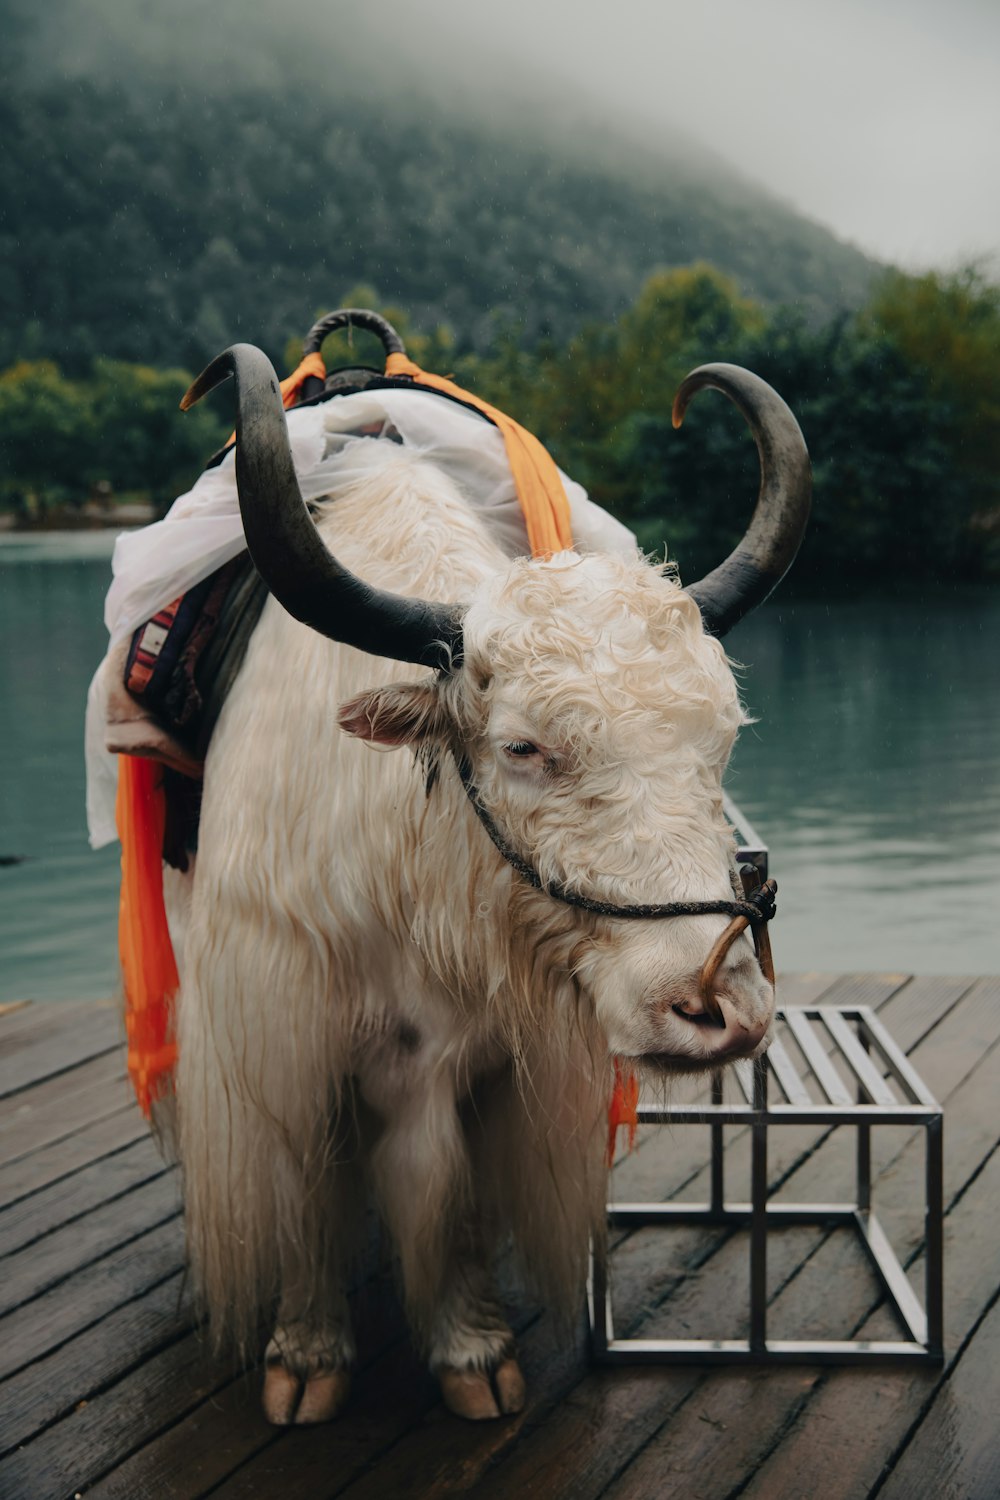 a yak with long horns standing on a dock